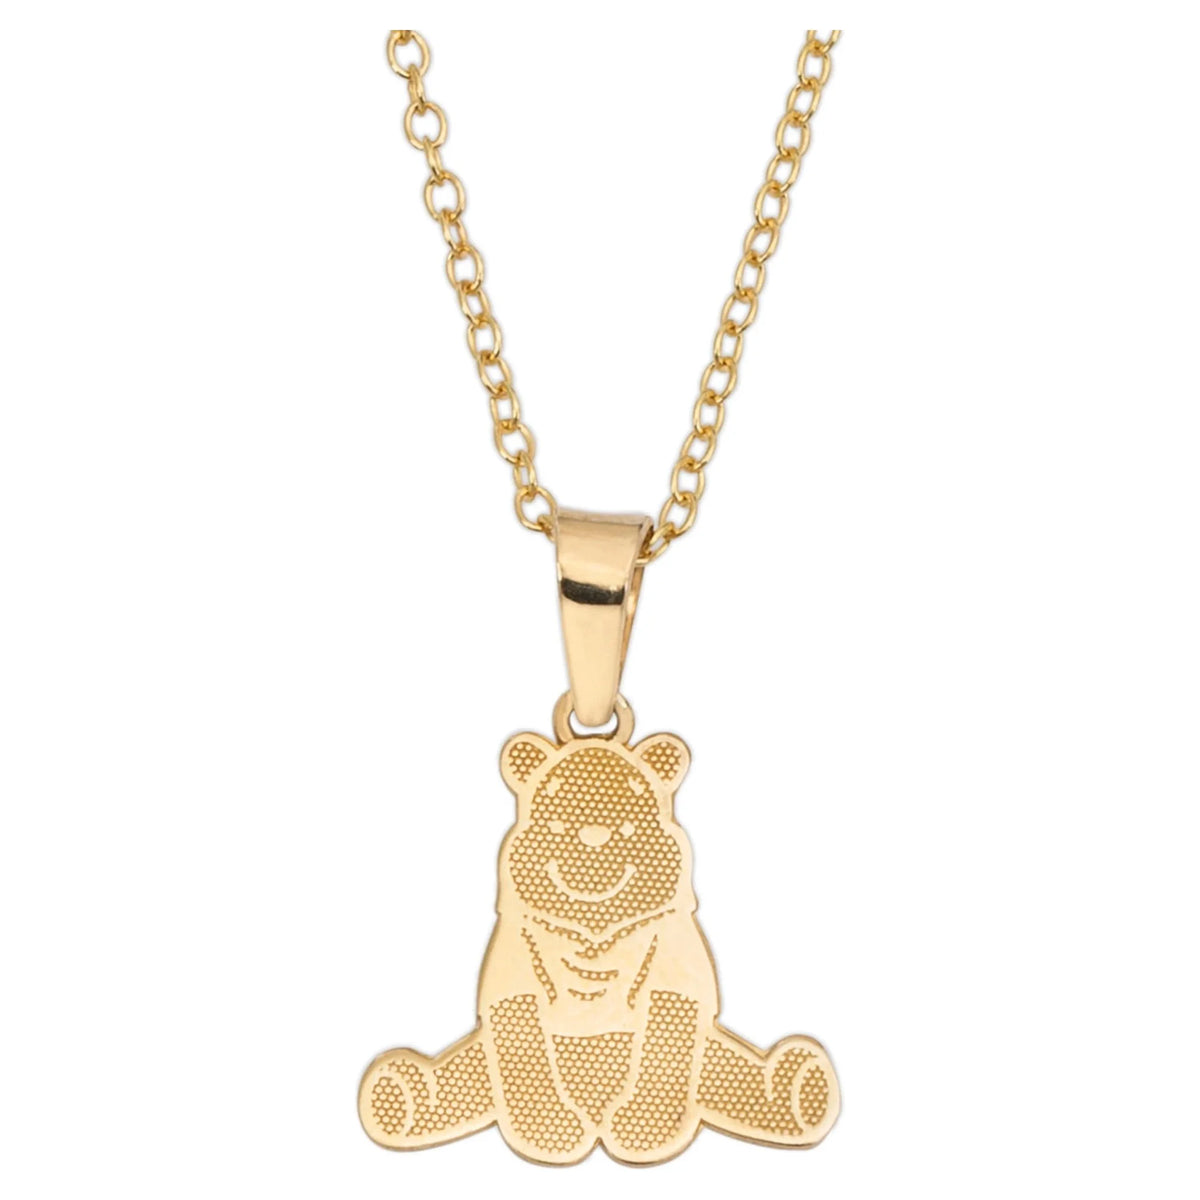 Disney 10K Yellow-Gold Winnie the Pooh Pendant Necklace, 18" Chain